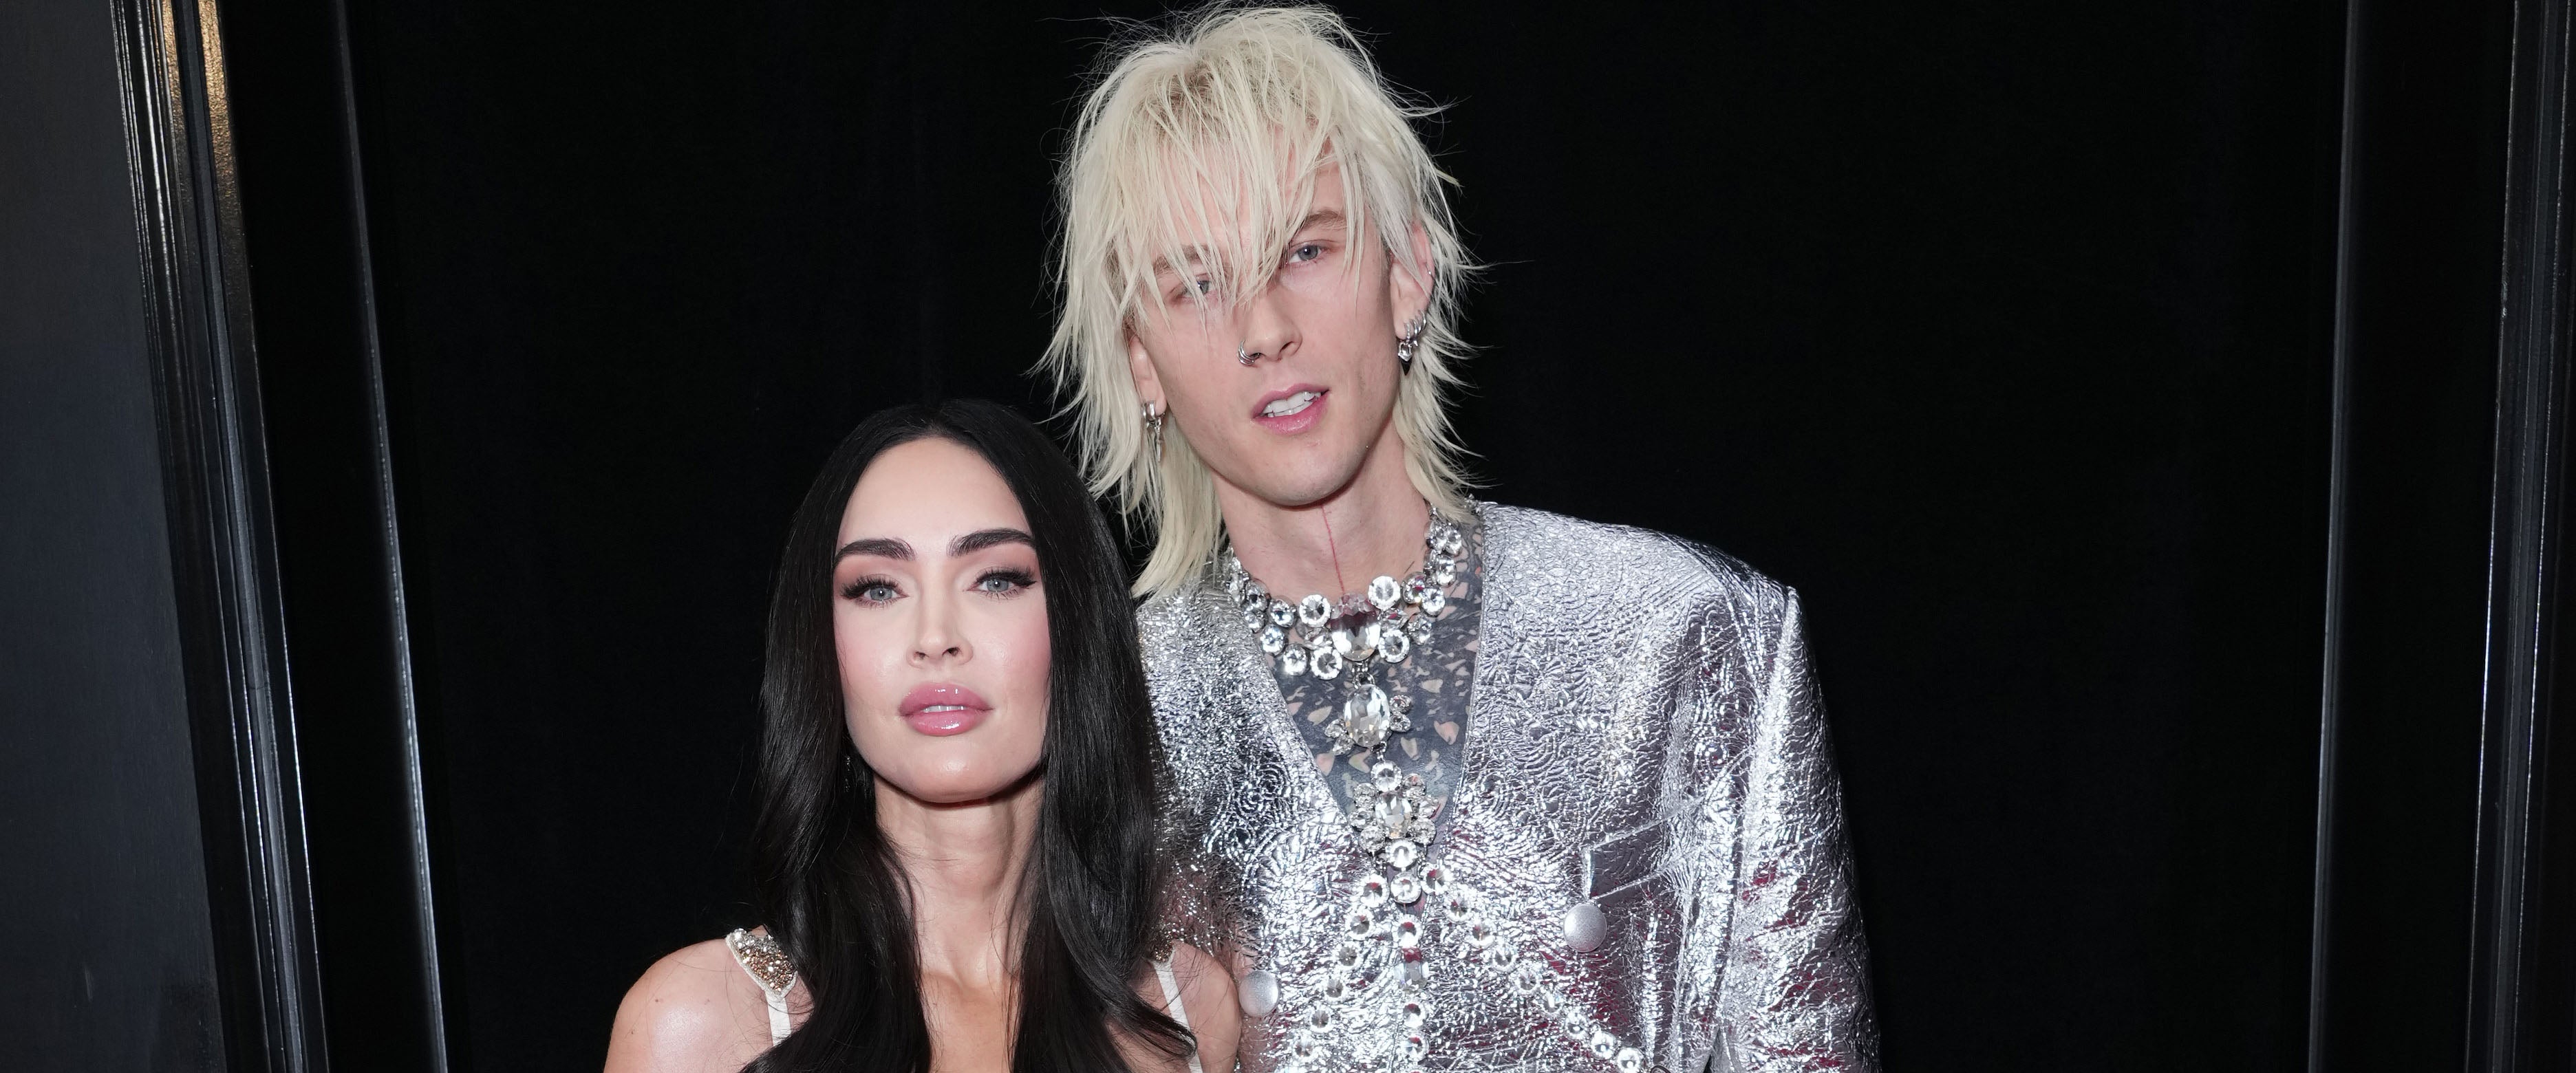 Megan Fox Opens Up About Suffering Miscarriage With Machine Gun